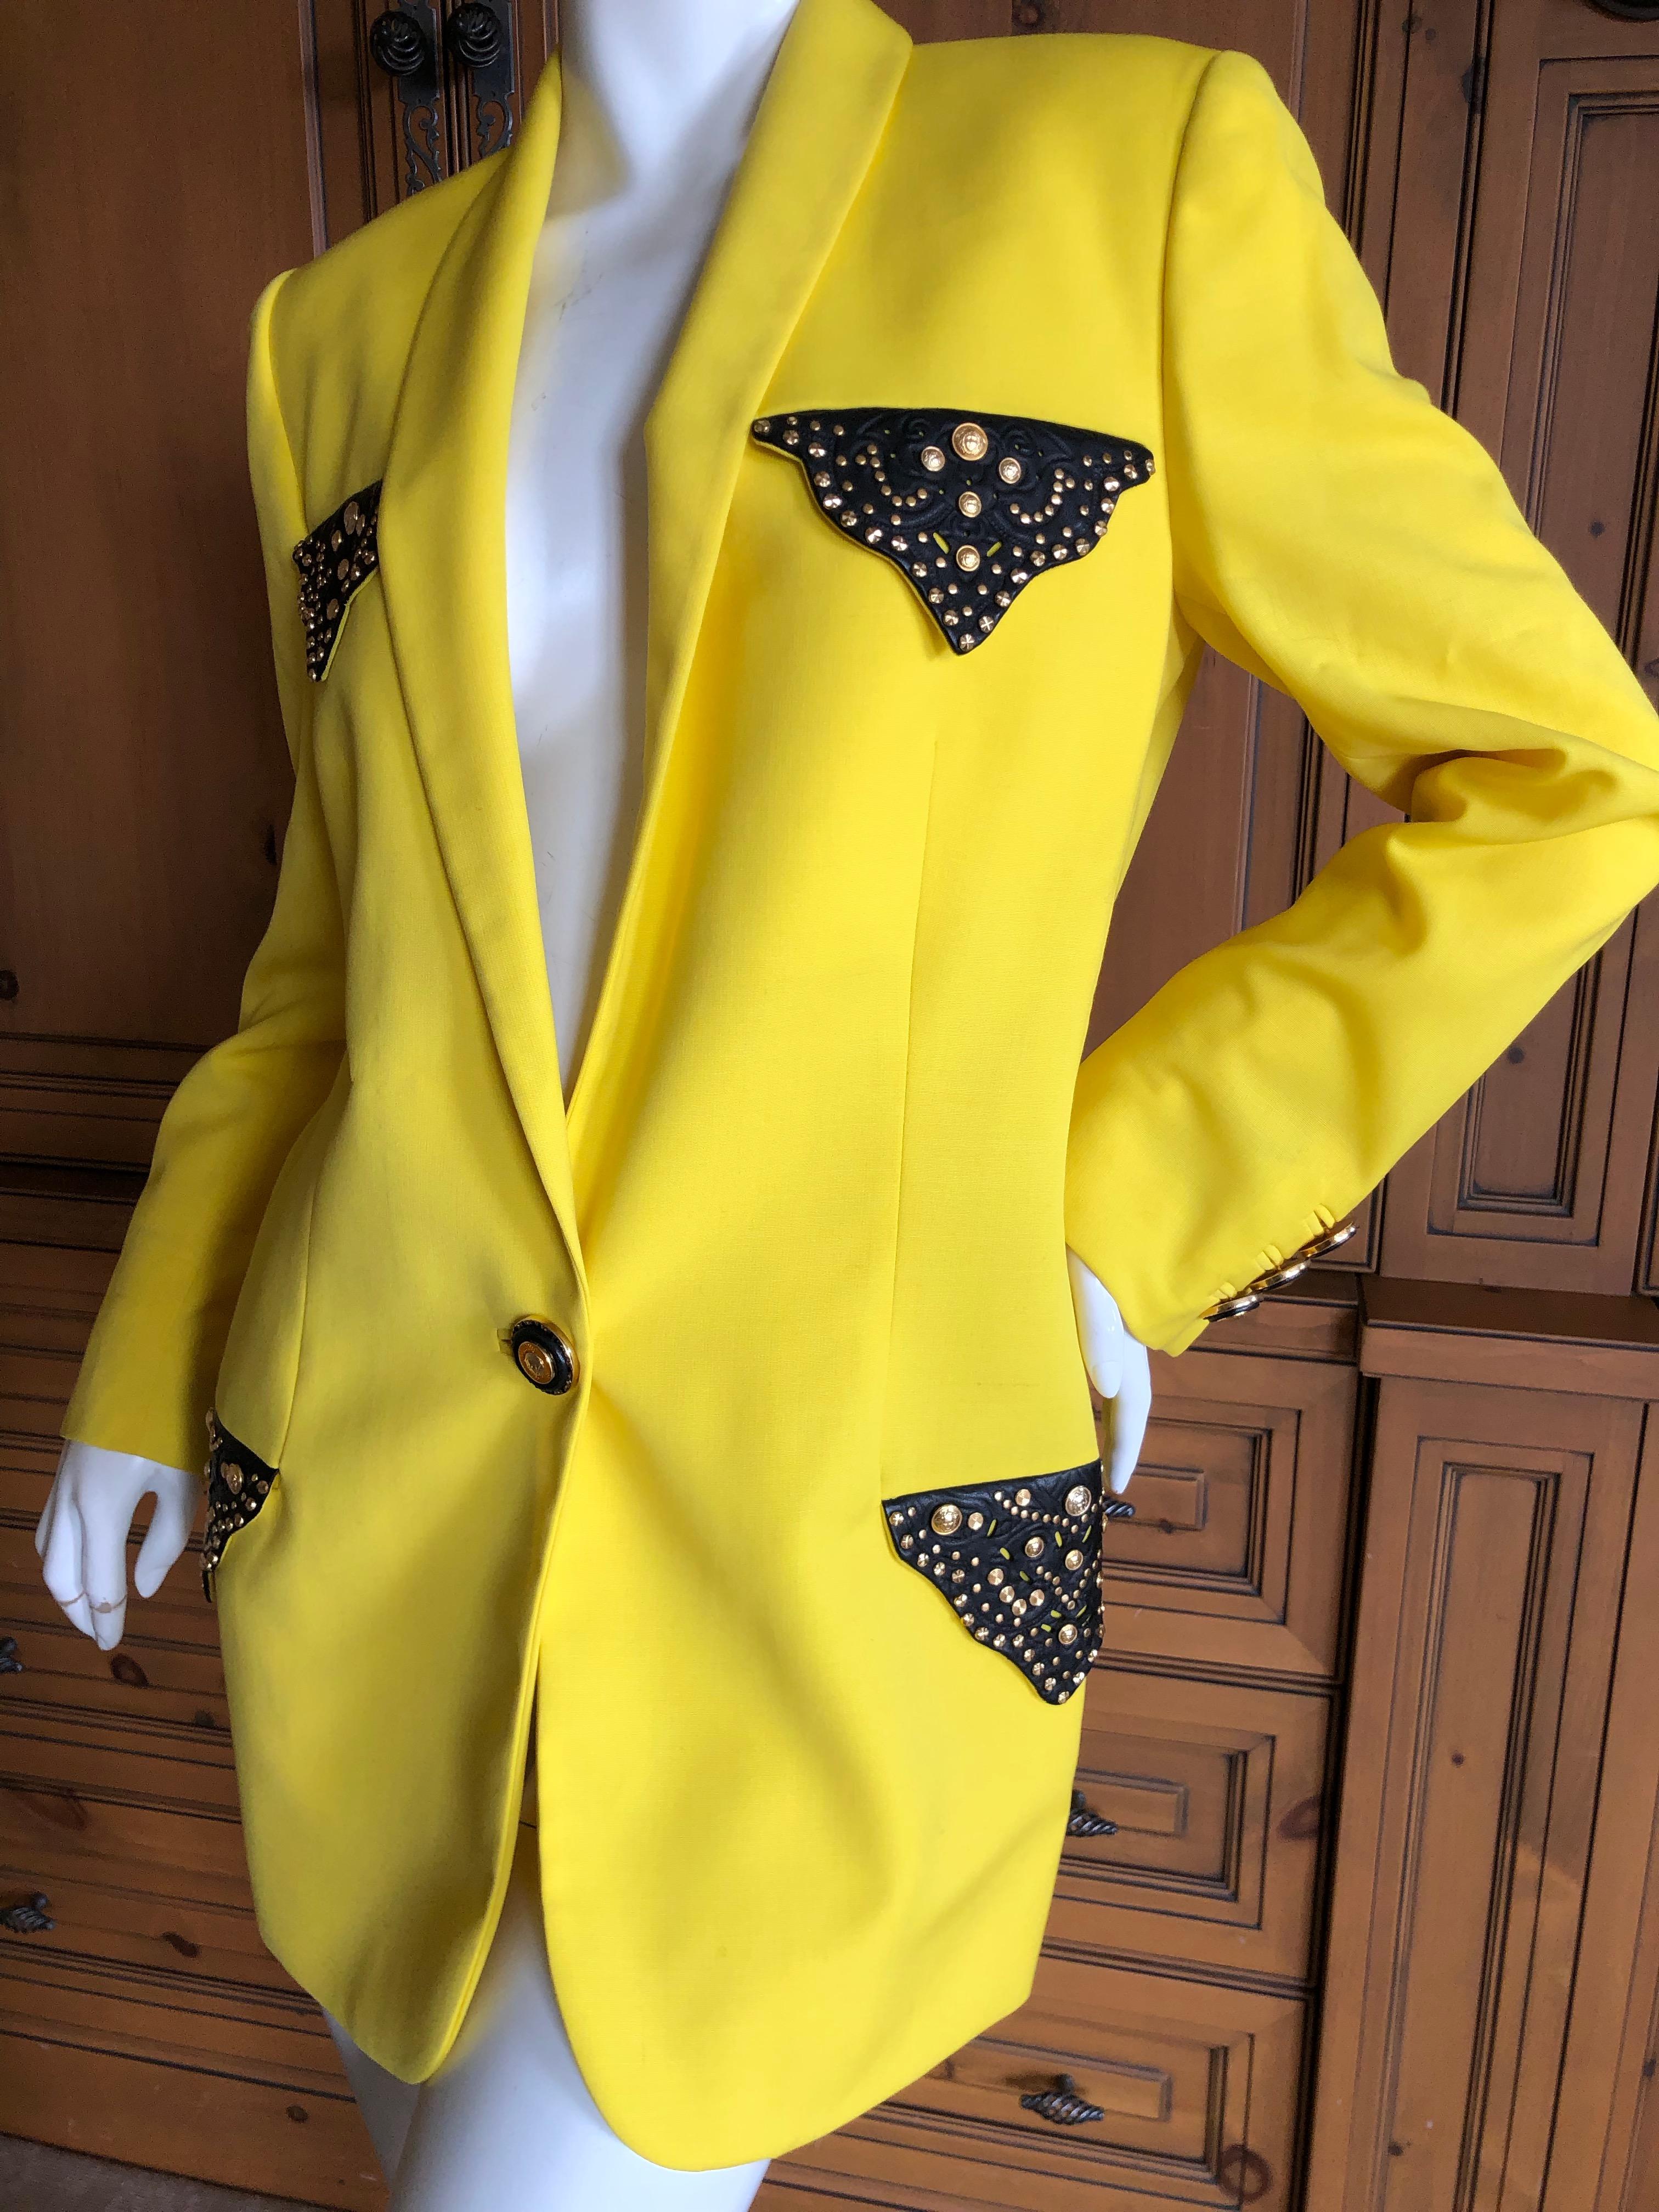 Women's Gianni Versace Iconic Fall 1992 Screaming Yellow Jacket with Leather Details For Sale